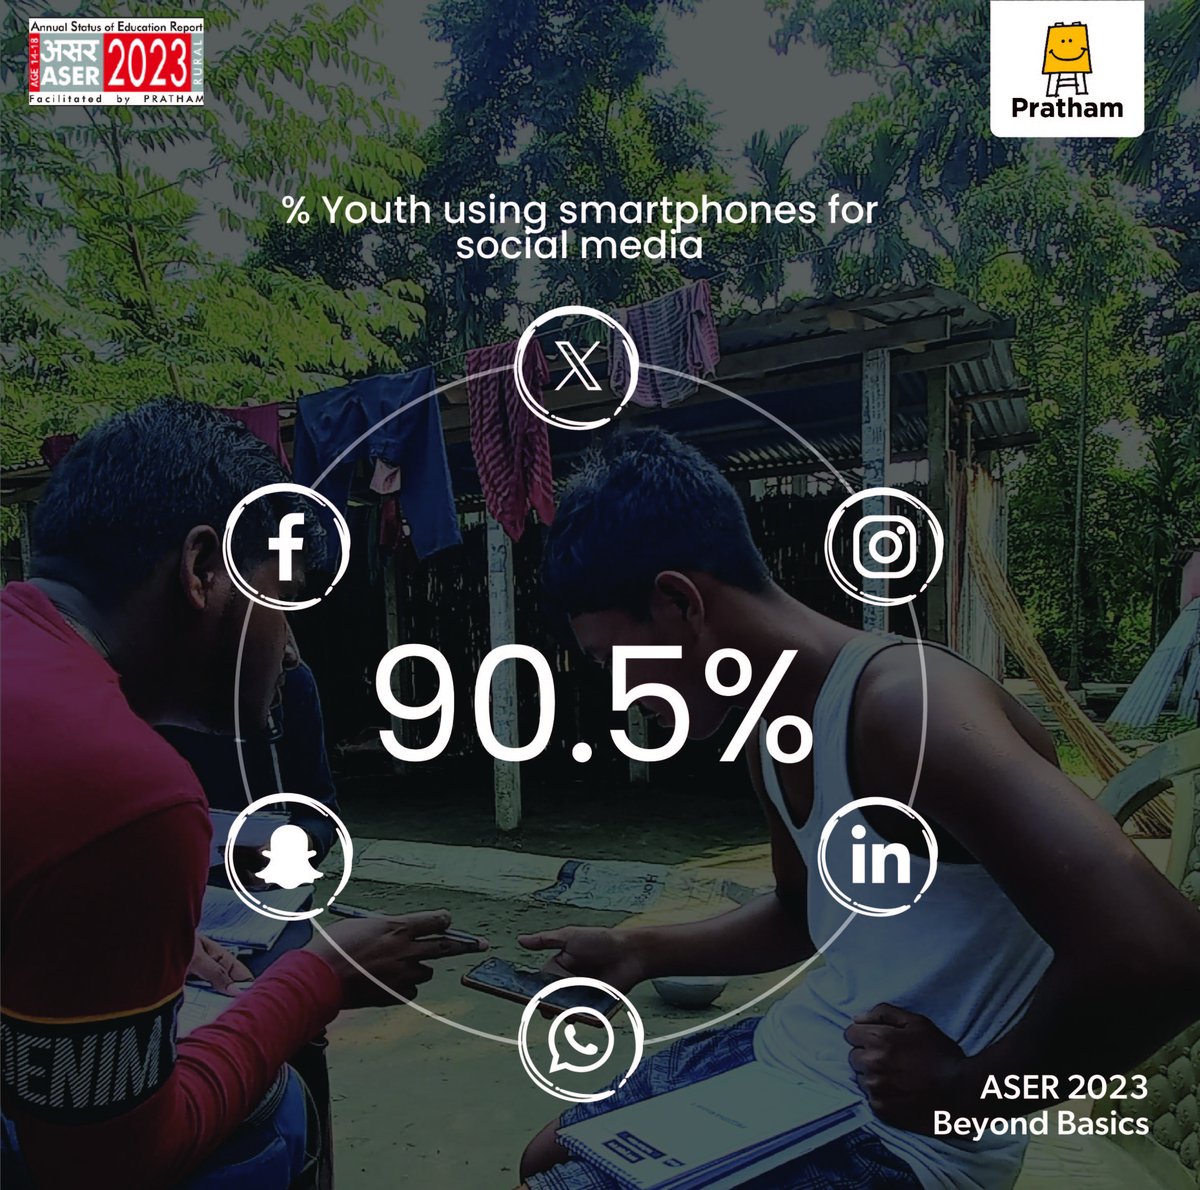 ASER 2023 investigated the access to and usage of smartphones among youth aged 14-18 in rural India. To know more about ASER 2023 digital findings, visit asercentre.org #pratham #ngo